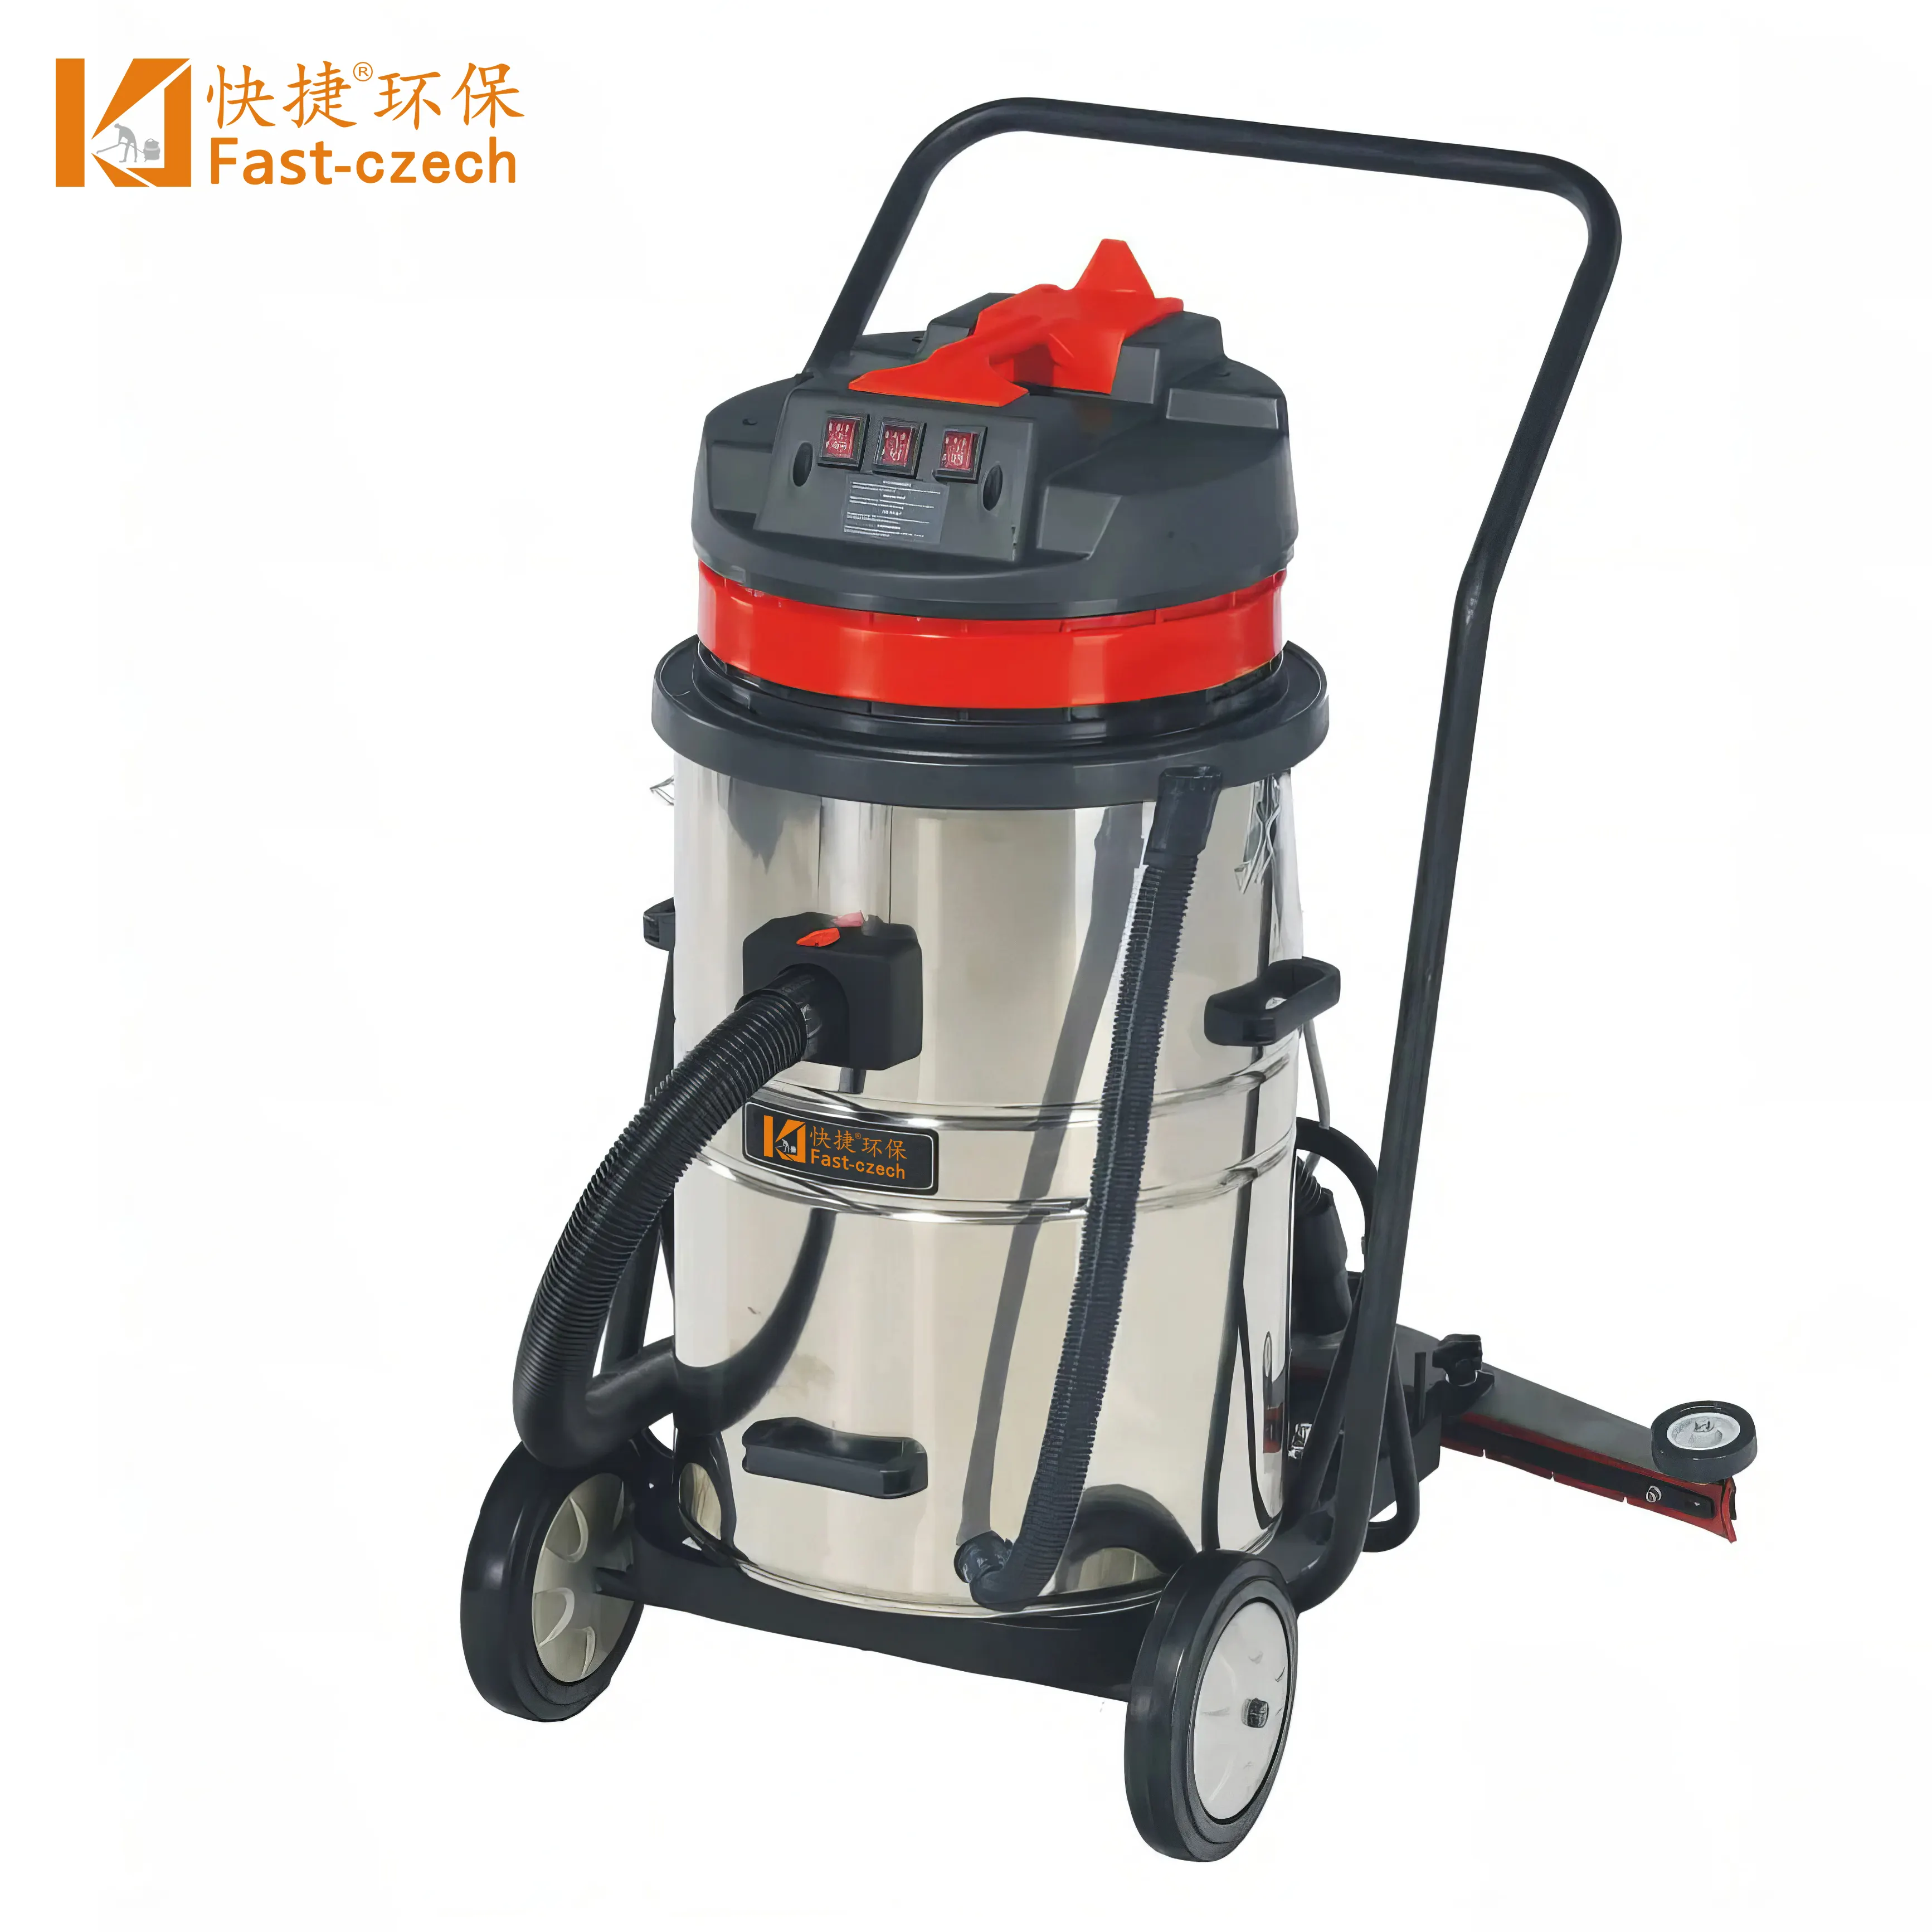 Fast-czech BF585-T 3-motor carpet cleaning machine car vacuum cleaner dry and wet vacuum cleaner